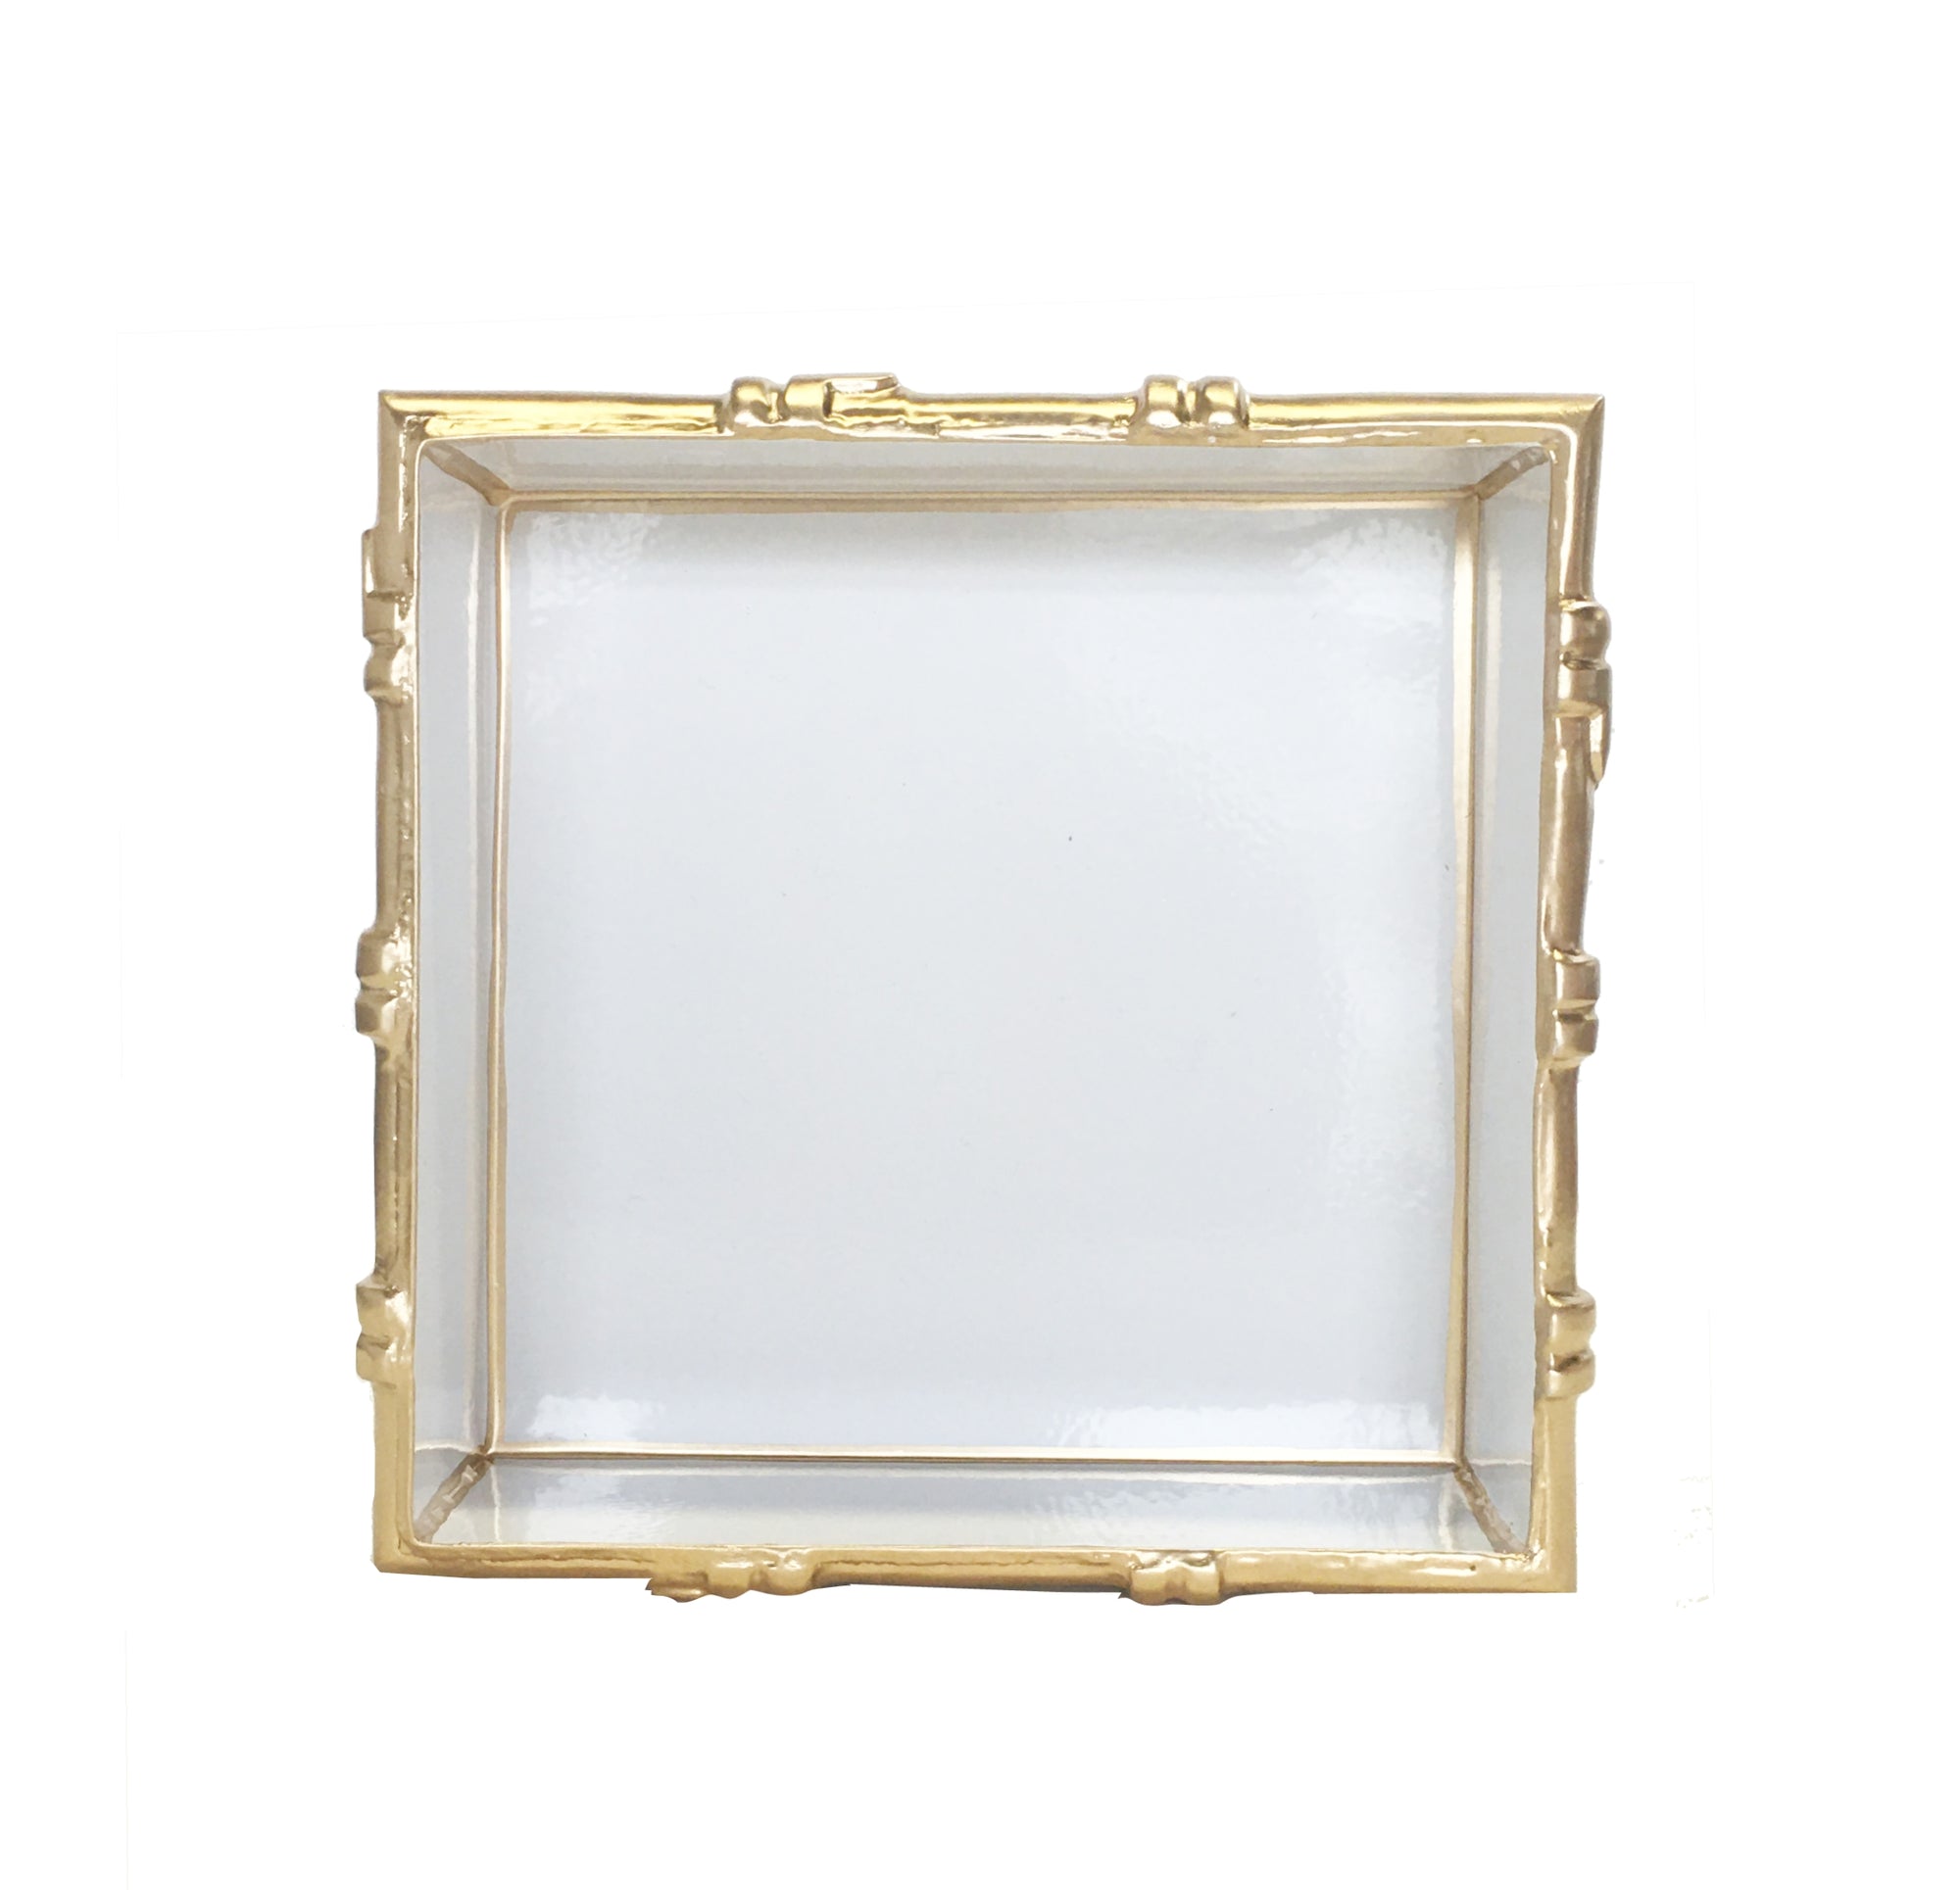 Dana Gibson Bamboo in White Square Tray